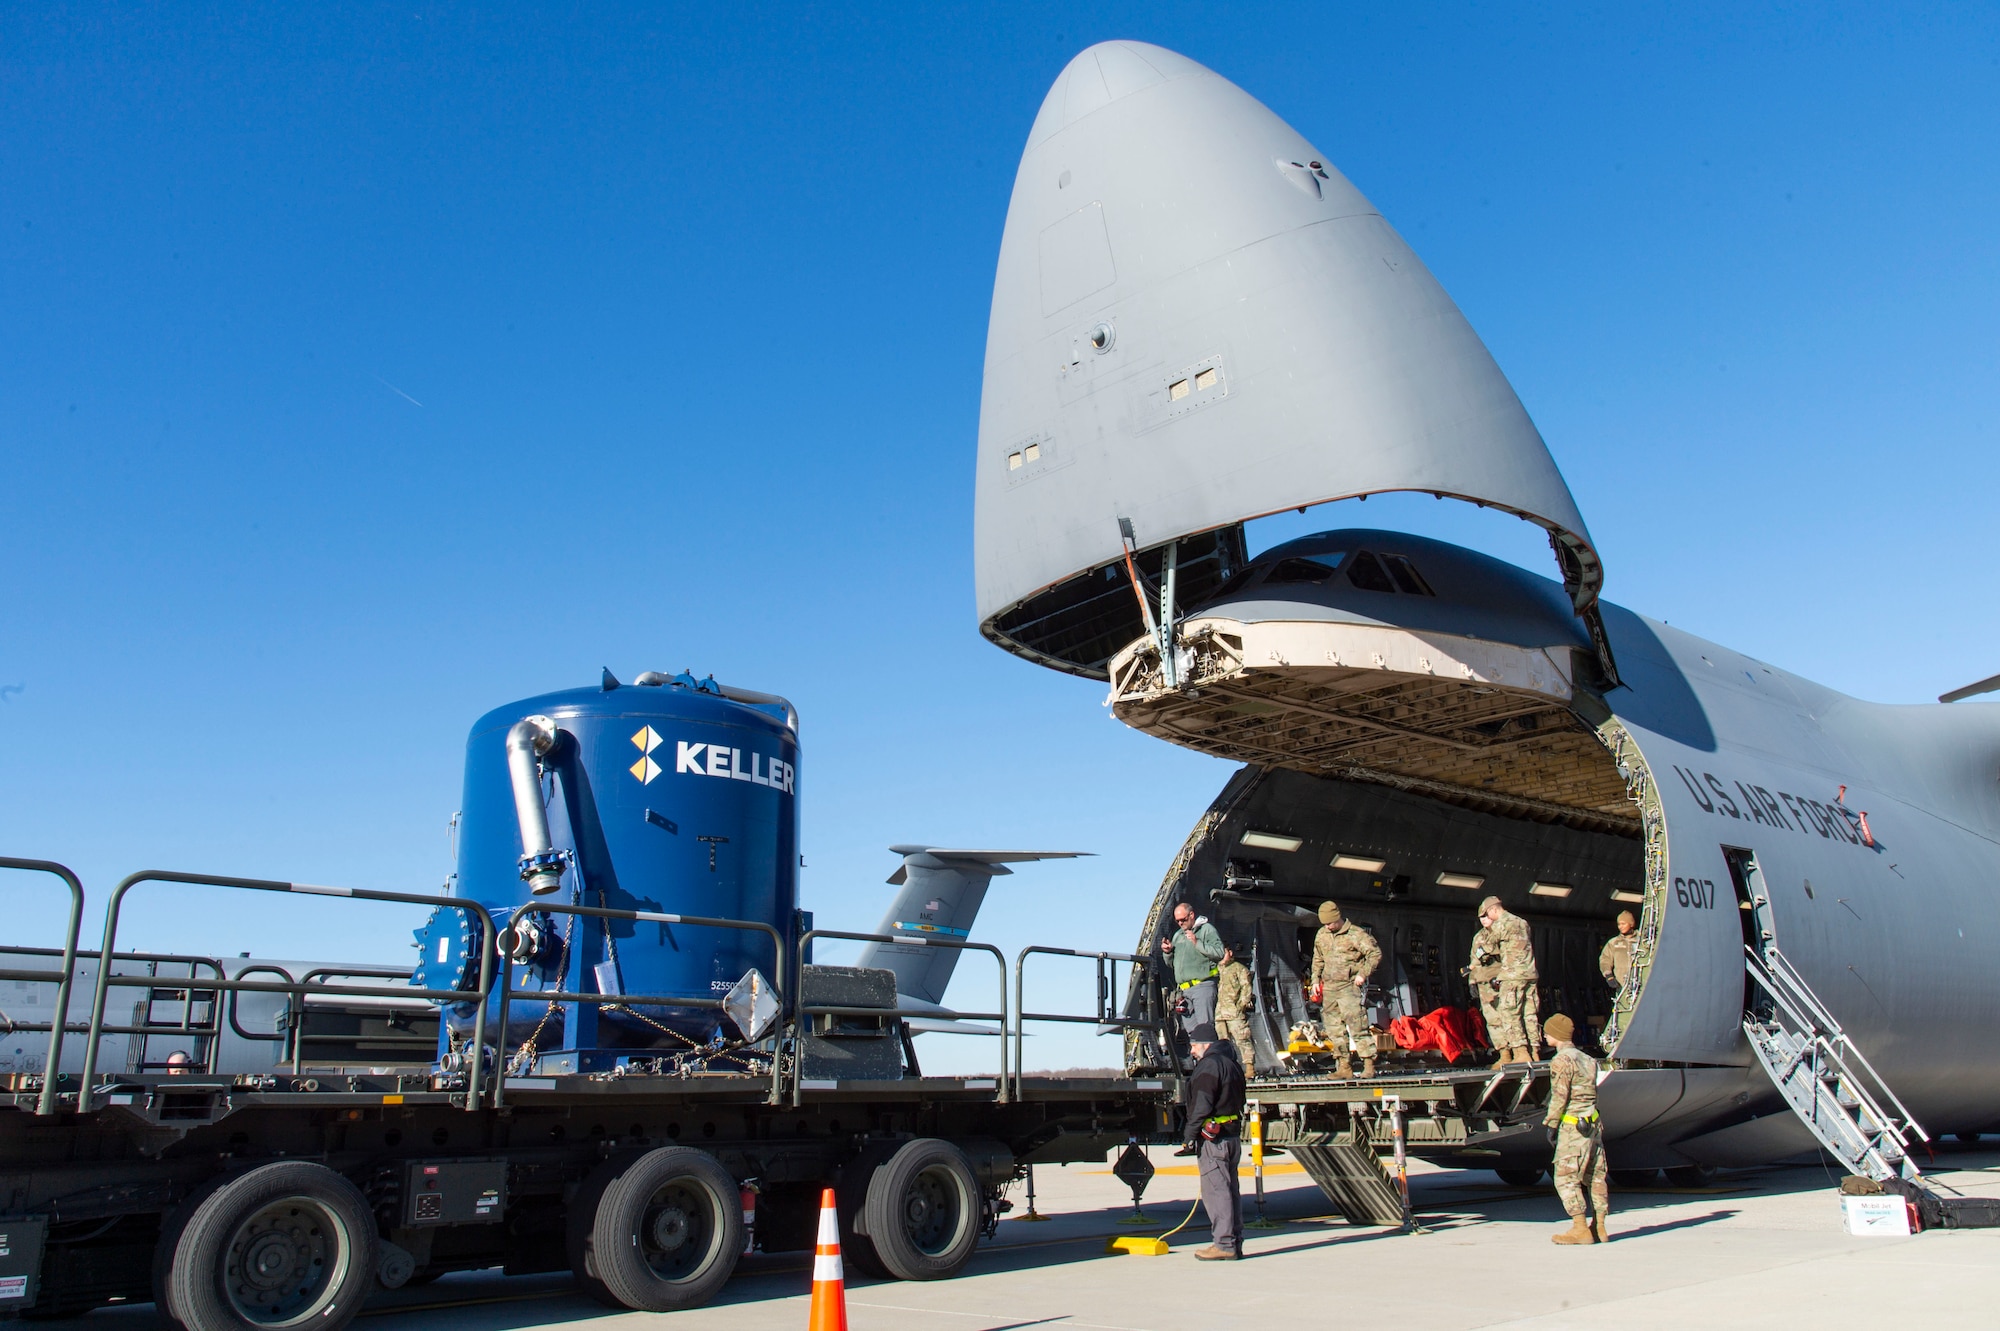 A 436th Aerial Port Squadron ramp services load team prepares to load water filtration equipment on a C-5M Super Galaxy at Dover Air Force Base, Delaware, Dec. 20, 2021. An aircrew from the 9th Airlift Squadron flew the equipment to Joint Base Pearl Harbor-Hickam (JBPHH), Hawaii. The JBPHH water quality recovery is a joint U.S. military initiative working closely with the State of Hawaii, Department of Health, Honolulu Board of Water Supply, U.S. government and independent organizations to restore a safe water delivery system to JBPHH military housing communities through testing, treatment, and repair. For detailed information, including available resources and locations, and news, go to www.navy.mil/jointbasewater. (U.S. Air Force photo by Roland Balik)